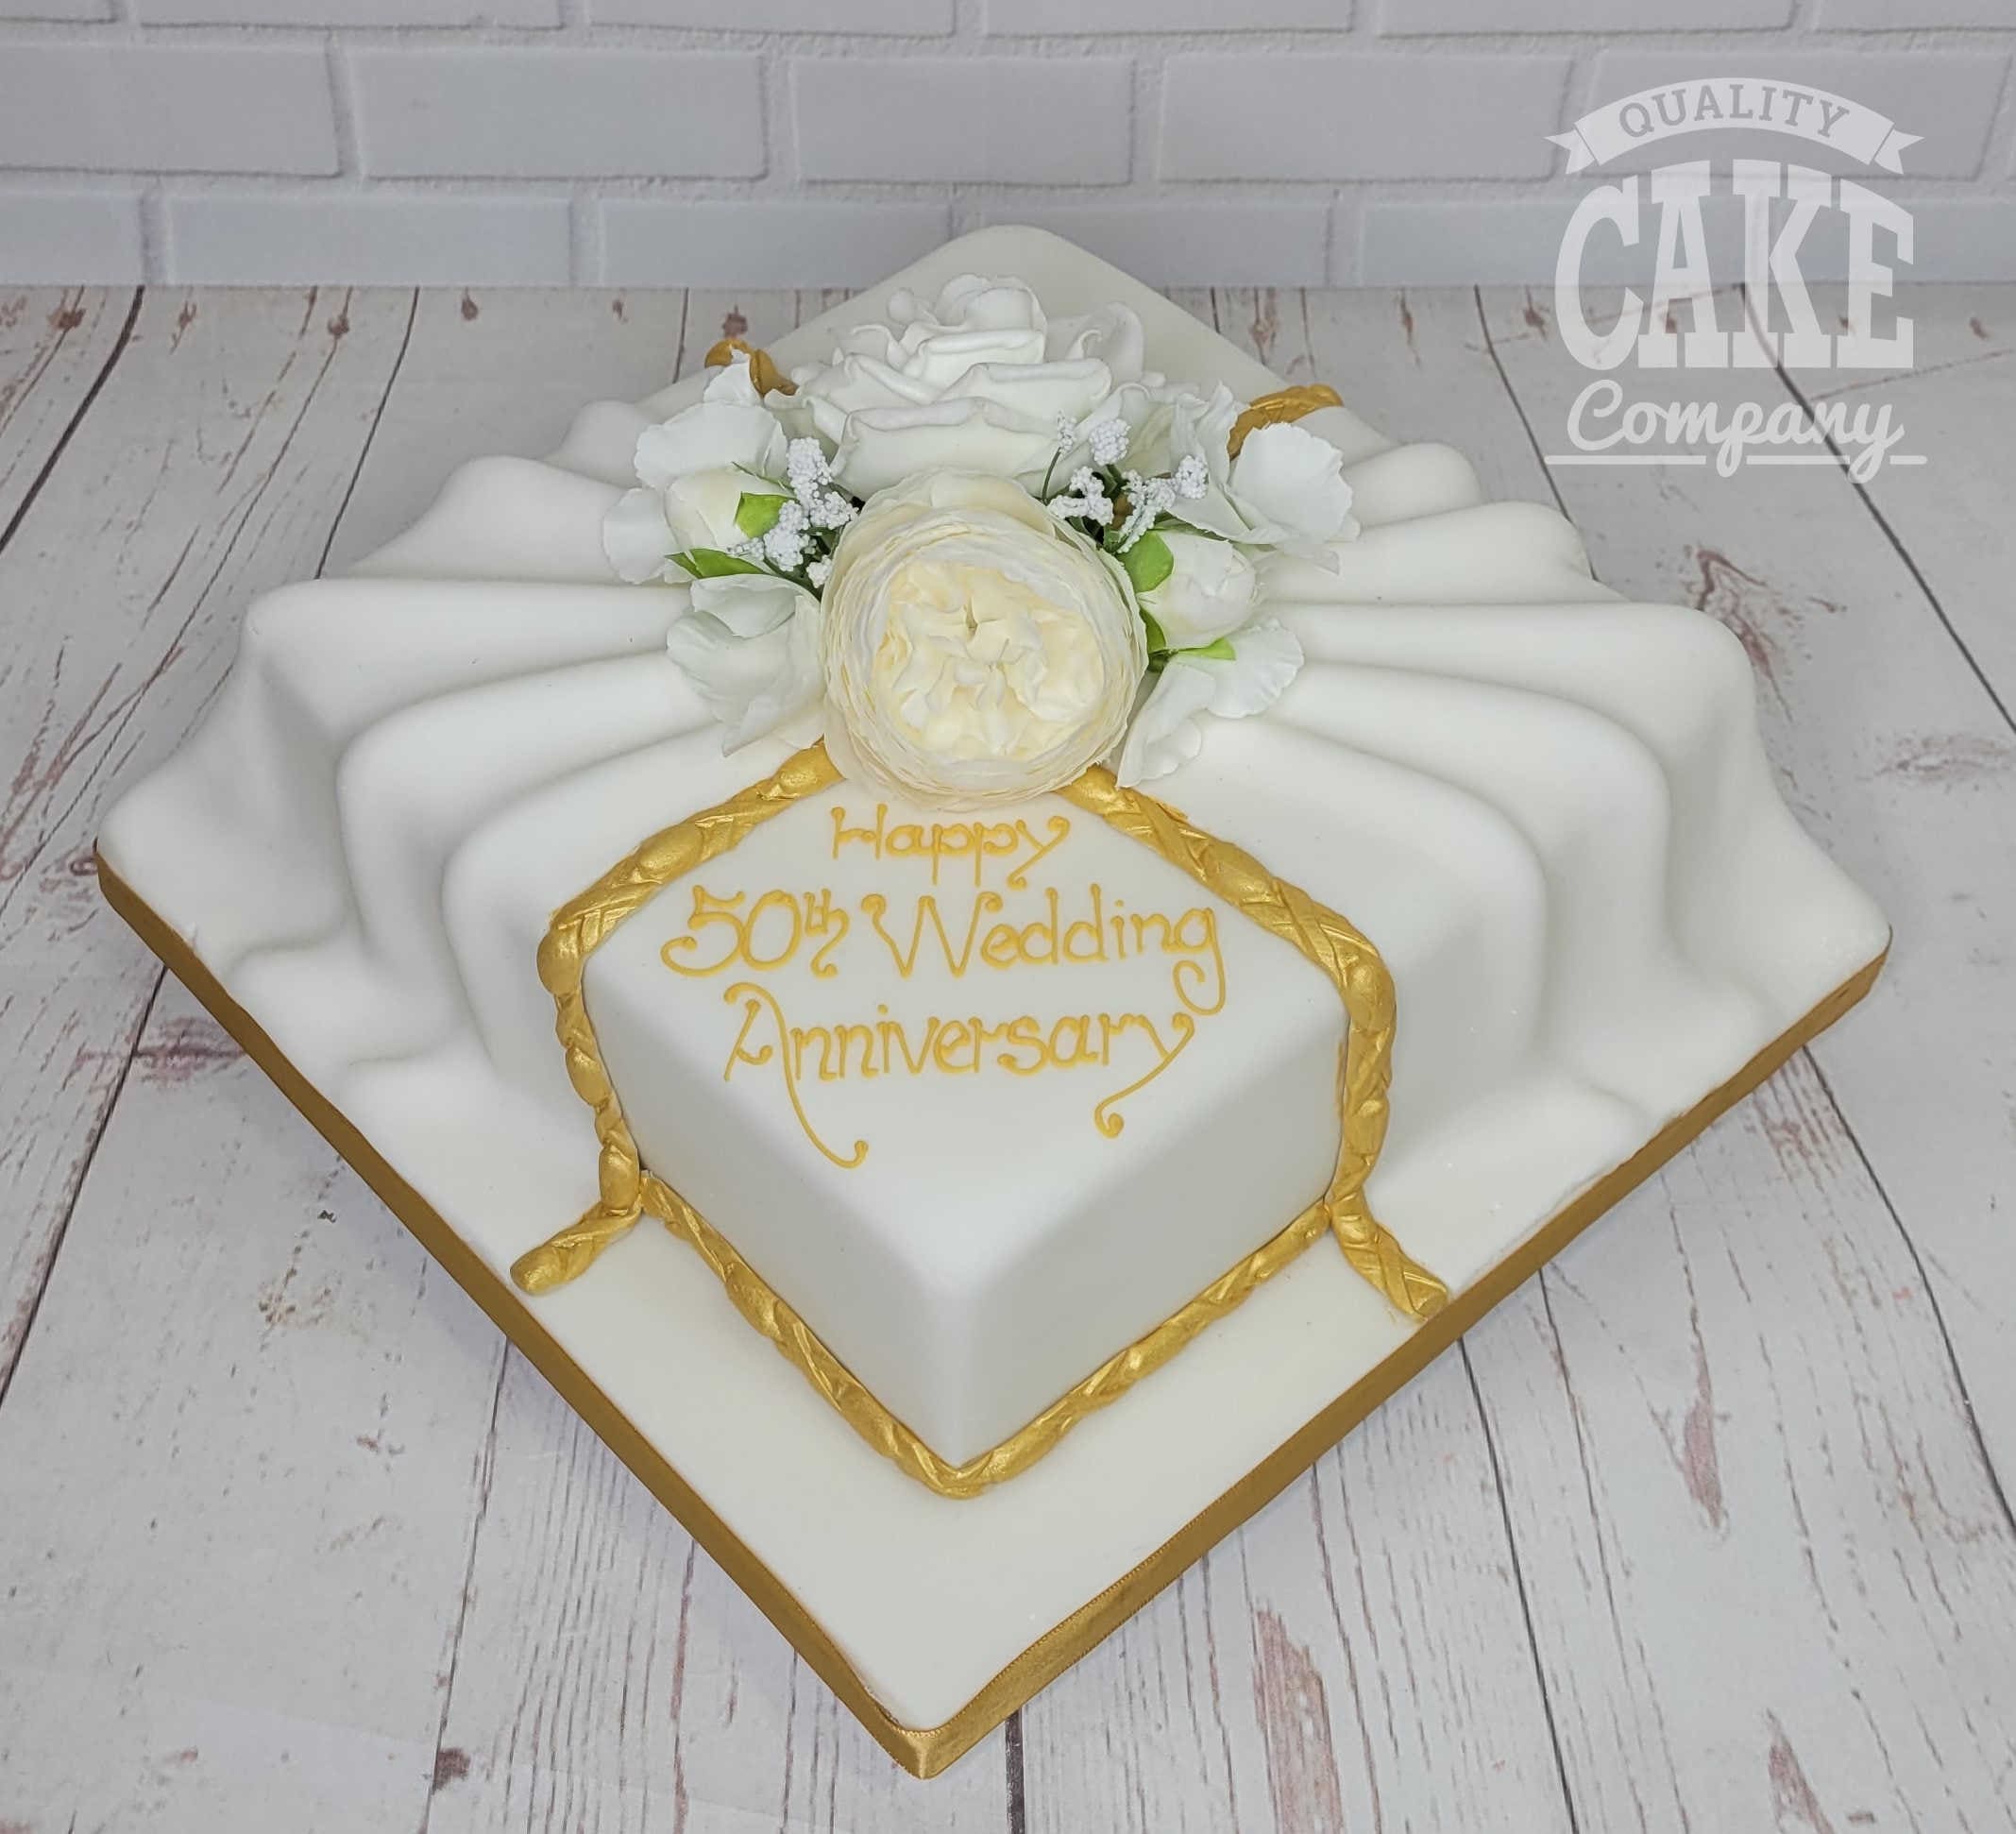 Make your Golden Wedding Anniversary Extra Special | Golden Anniversary  Cakes